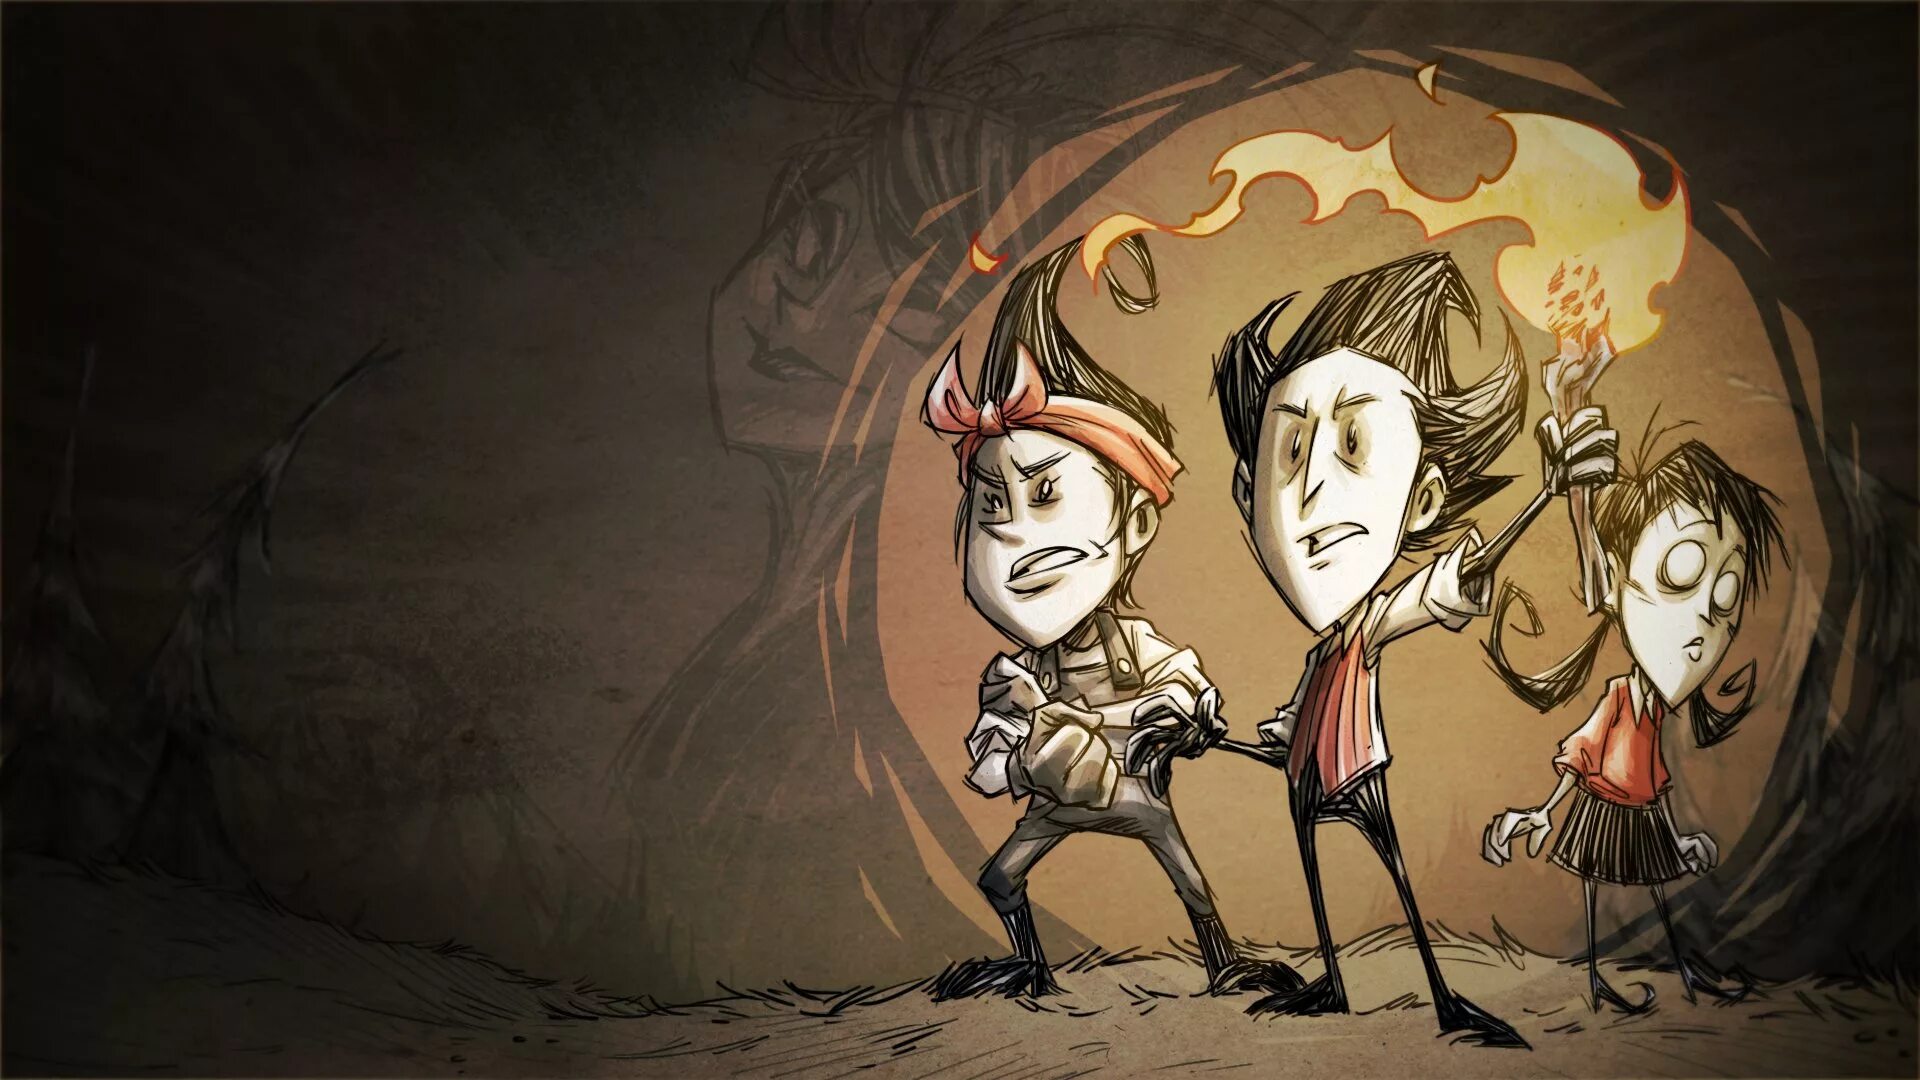 Dont le. Don t Starve together. Don't Starve Вайнона. Don't Starve together стрим. Донт старв Гамлет.